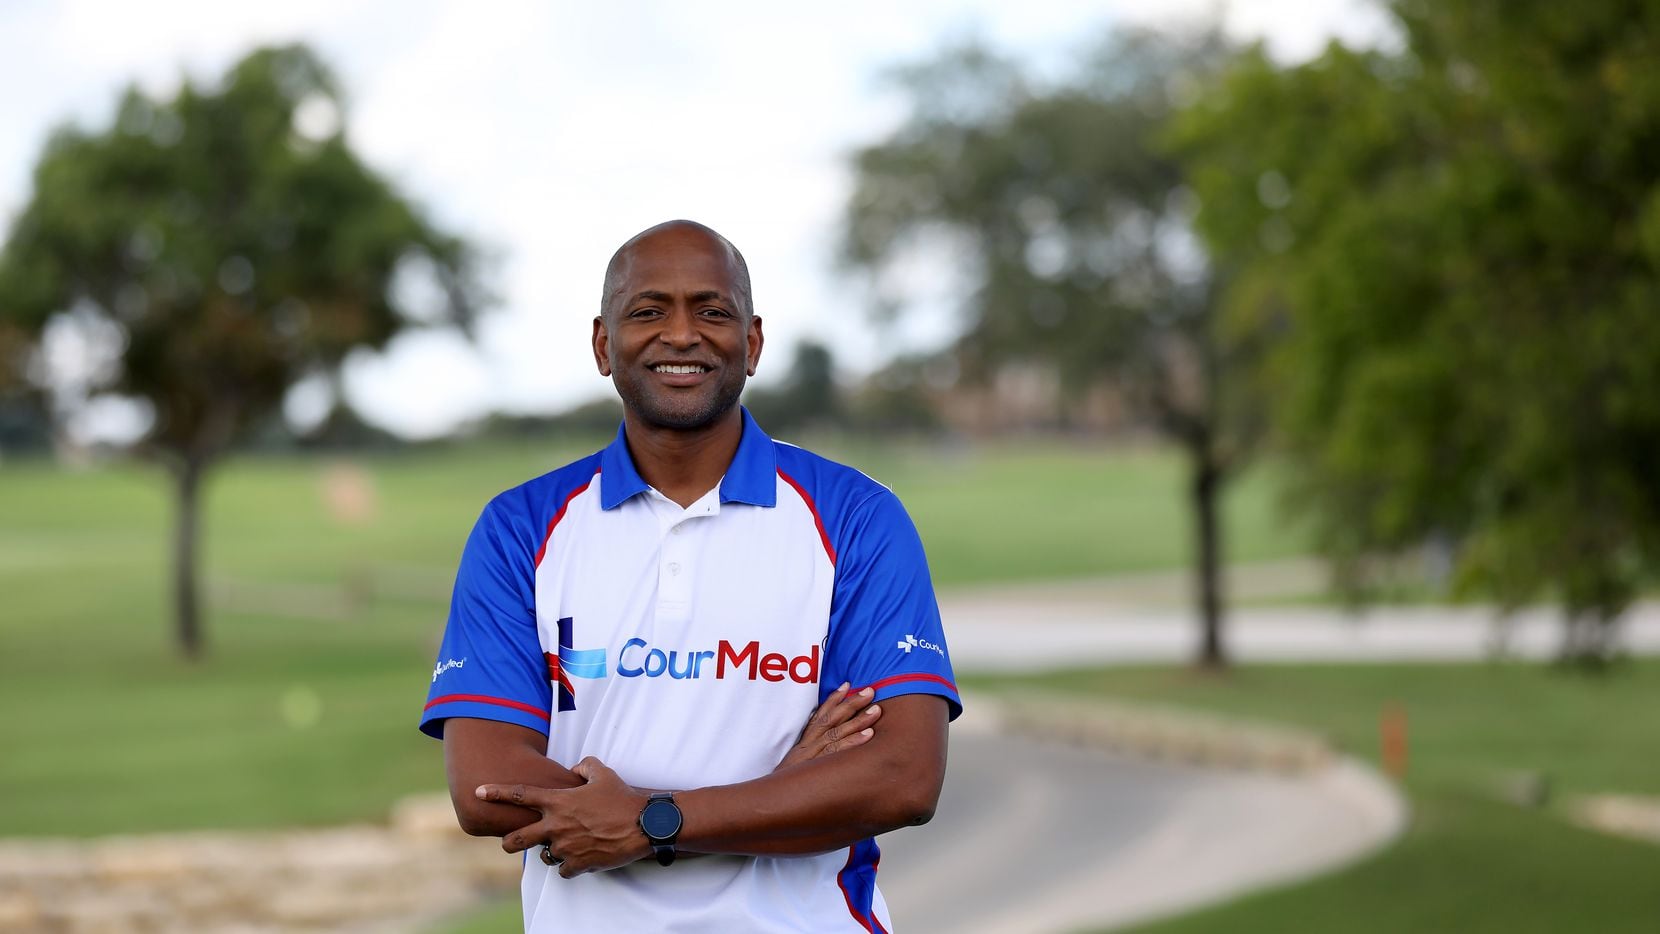 Derrick Miles is the founder and CEO of CourMed, a concierge delivery service that delivers...